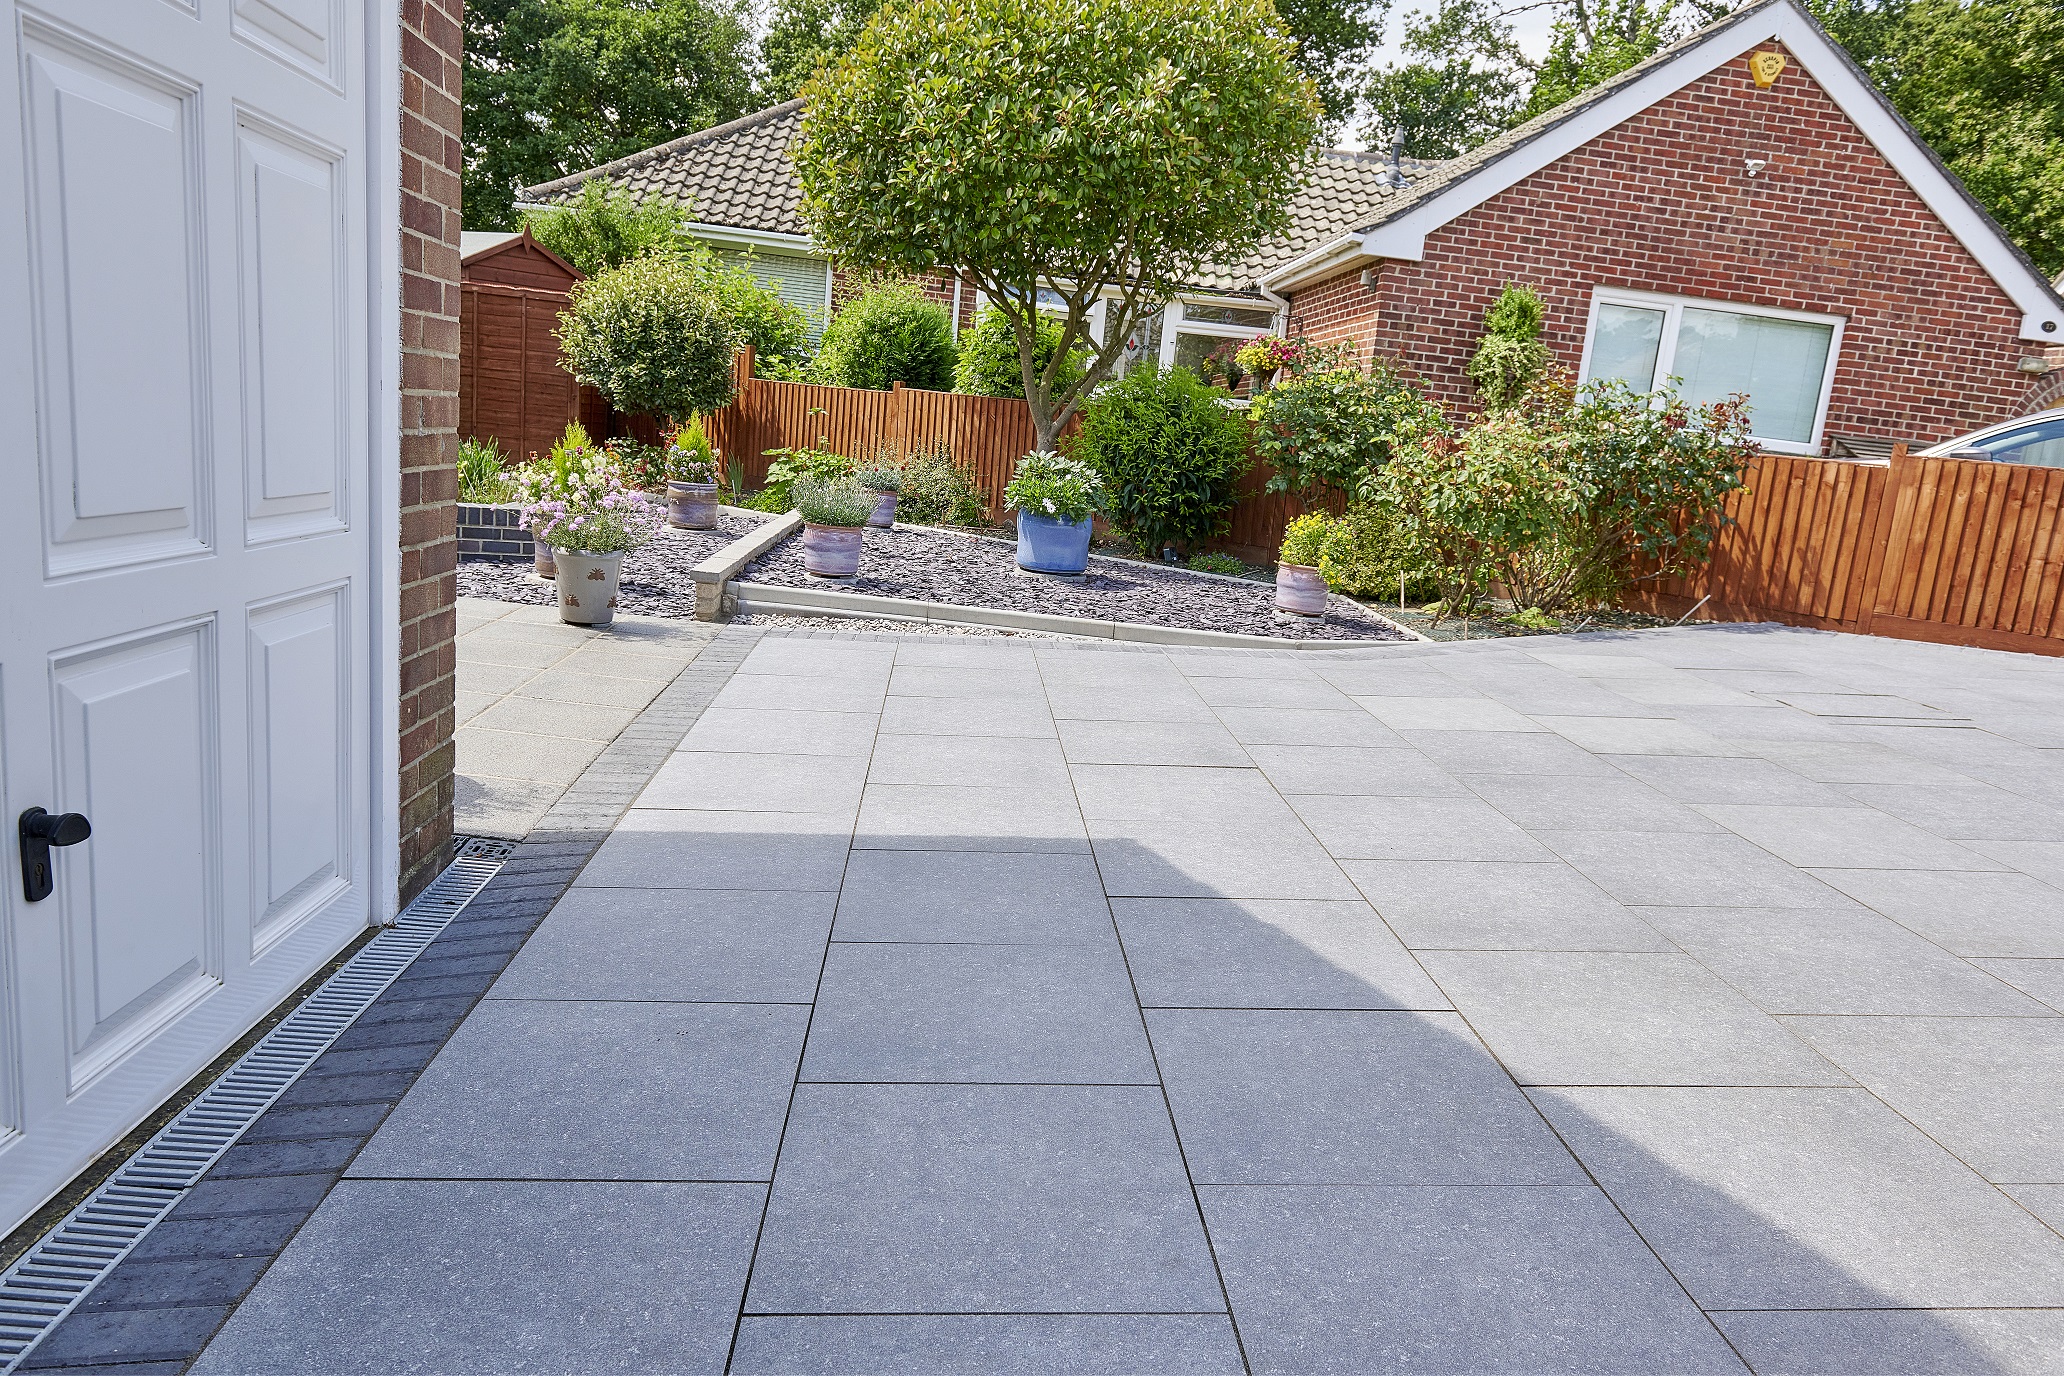 GeoCeramica Bluestone Gris Claro, Omega Charcoal and Drivestyle Kerb Charcoal